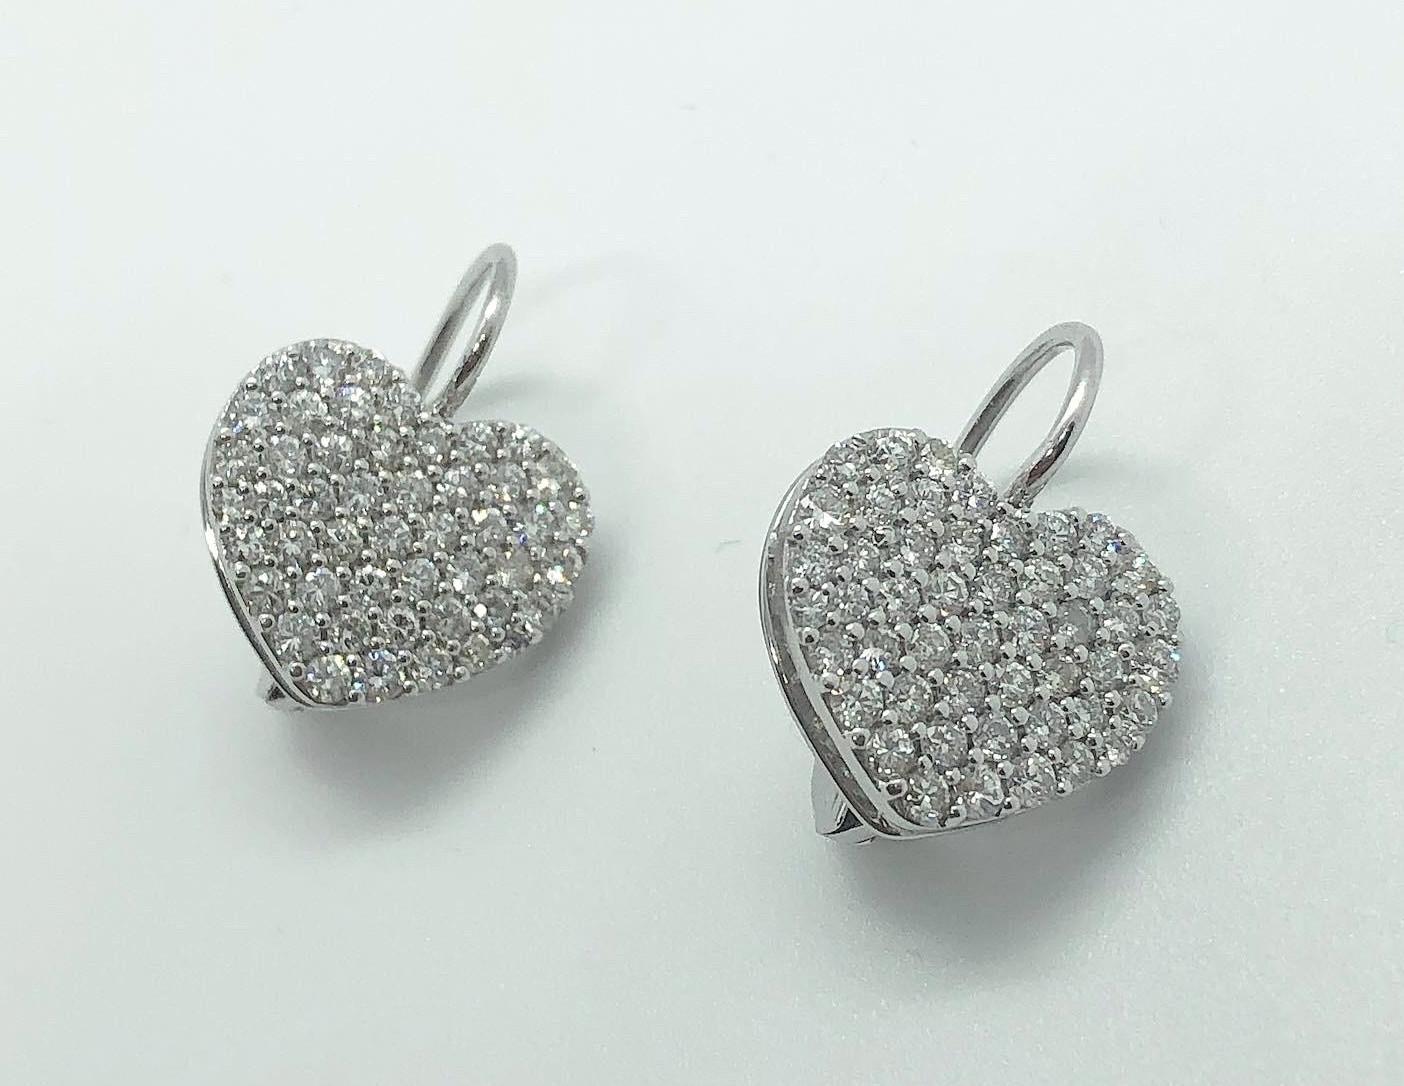 Elegant 18 carat white gold heart-shaped earrings studded with high quality diamonds of great brightness.
Traditional design jewel with a timeless charm.
The earrings contain:
- 90 natural diamonds, brilliant cut, color H, clarity VS1, total carats